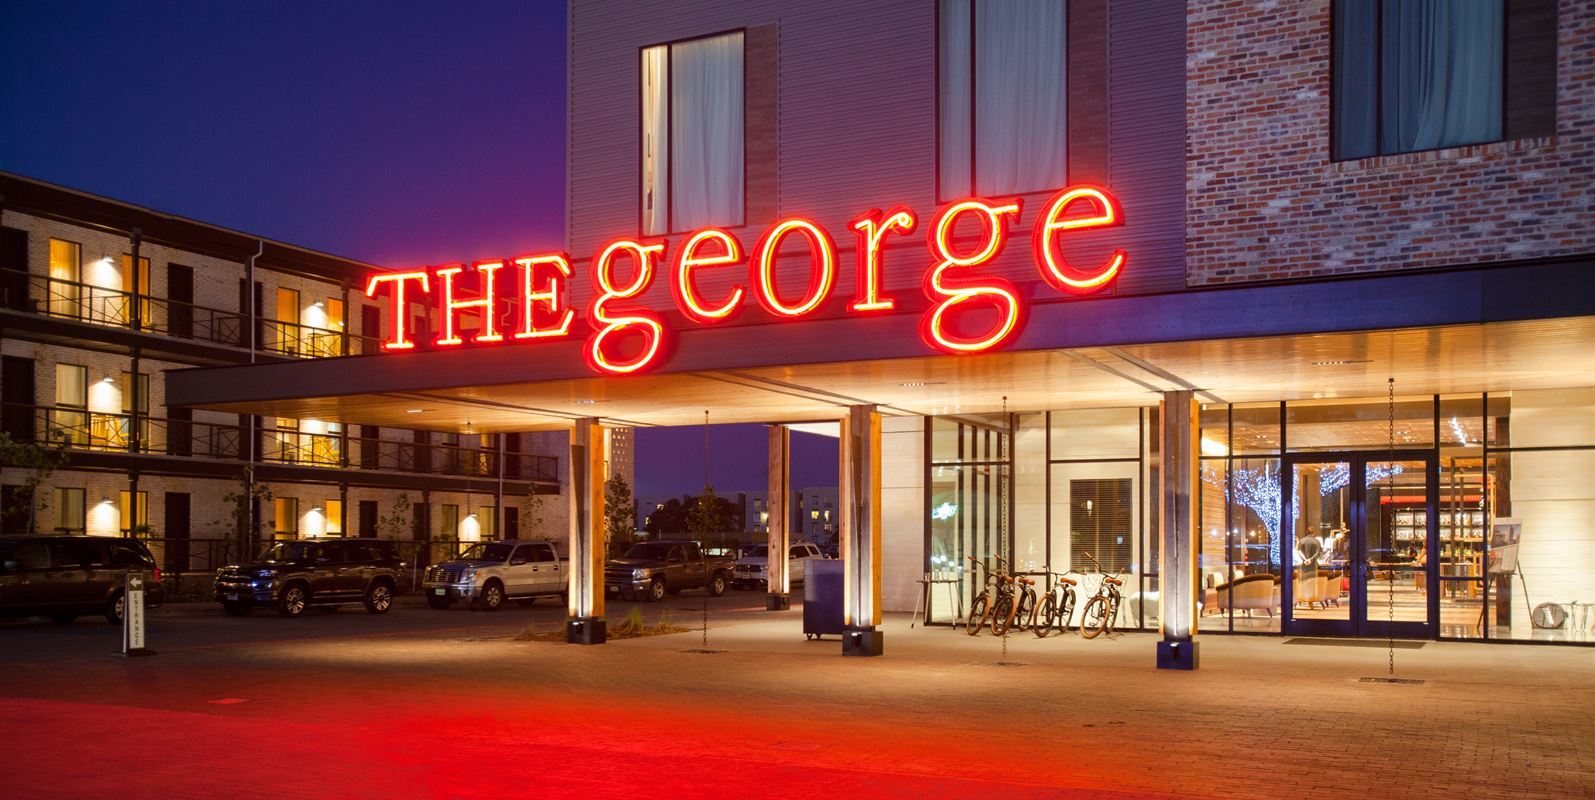 Photo of The George, College Station, TX